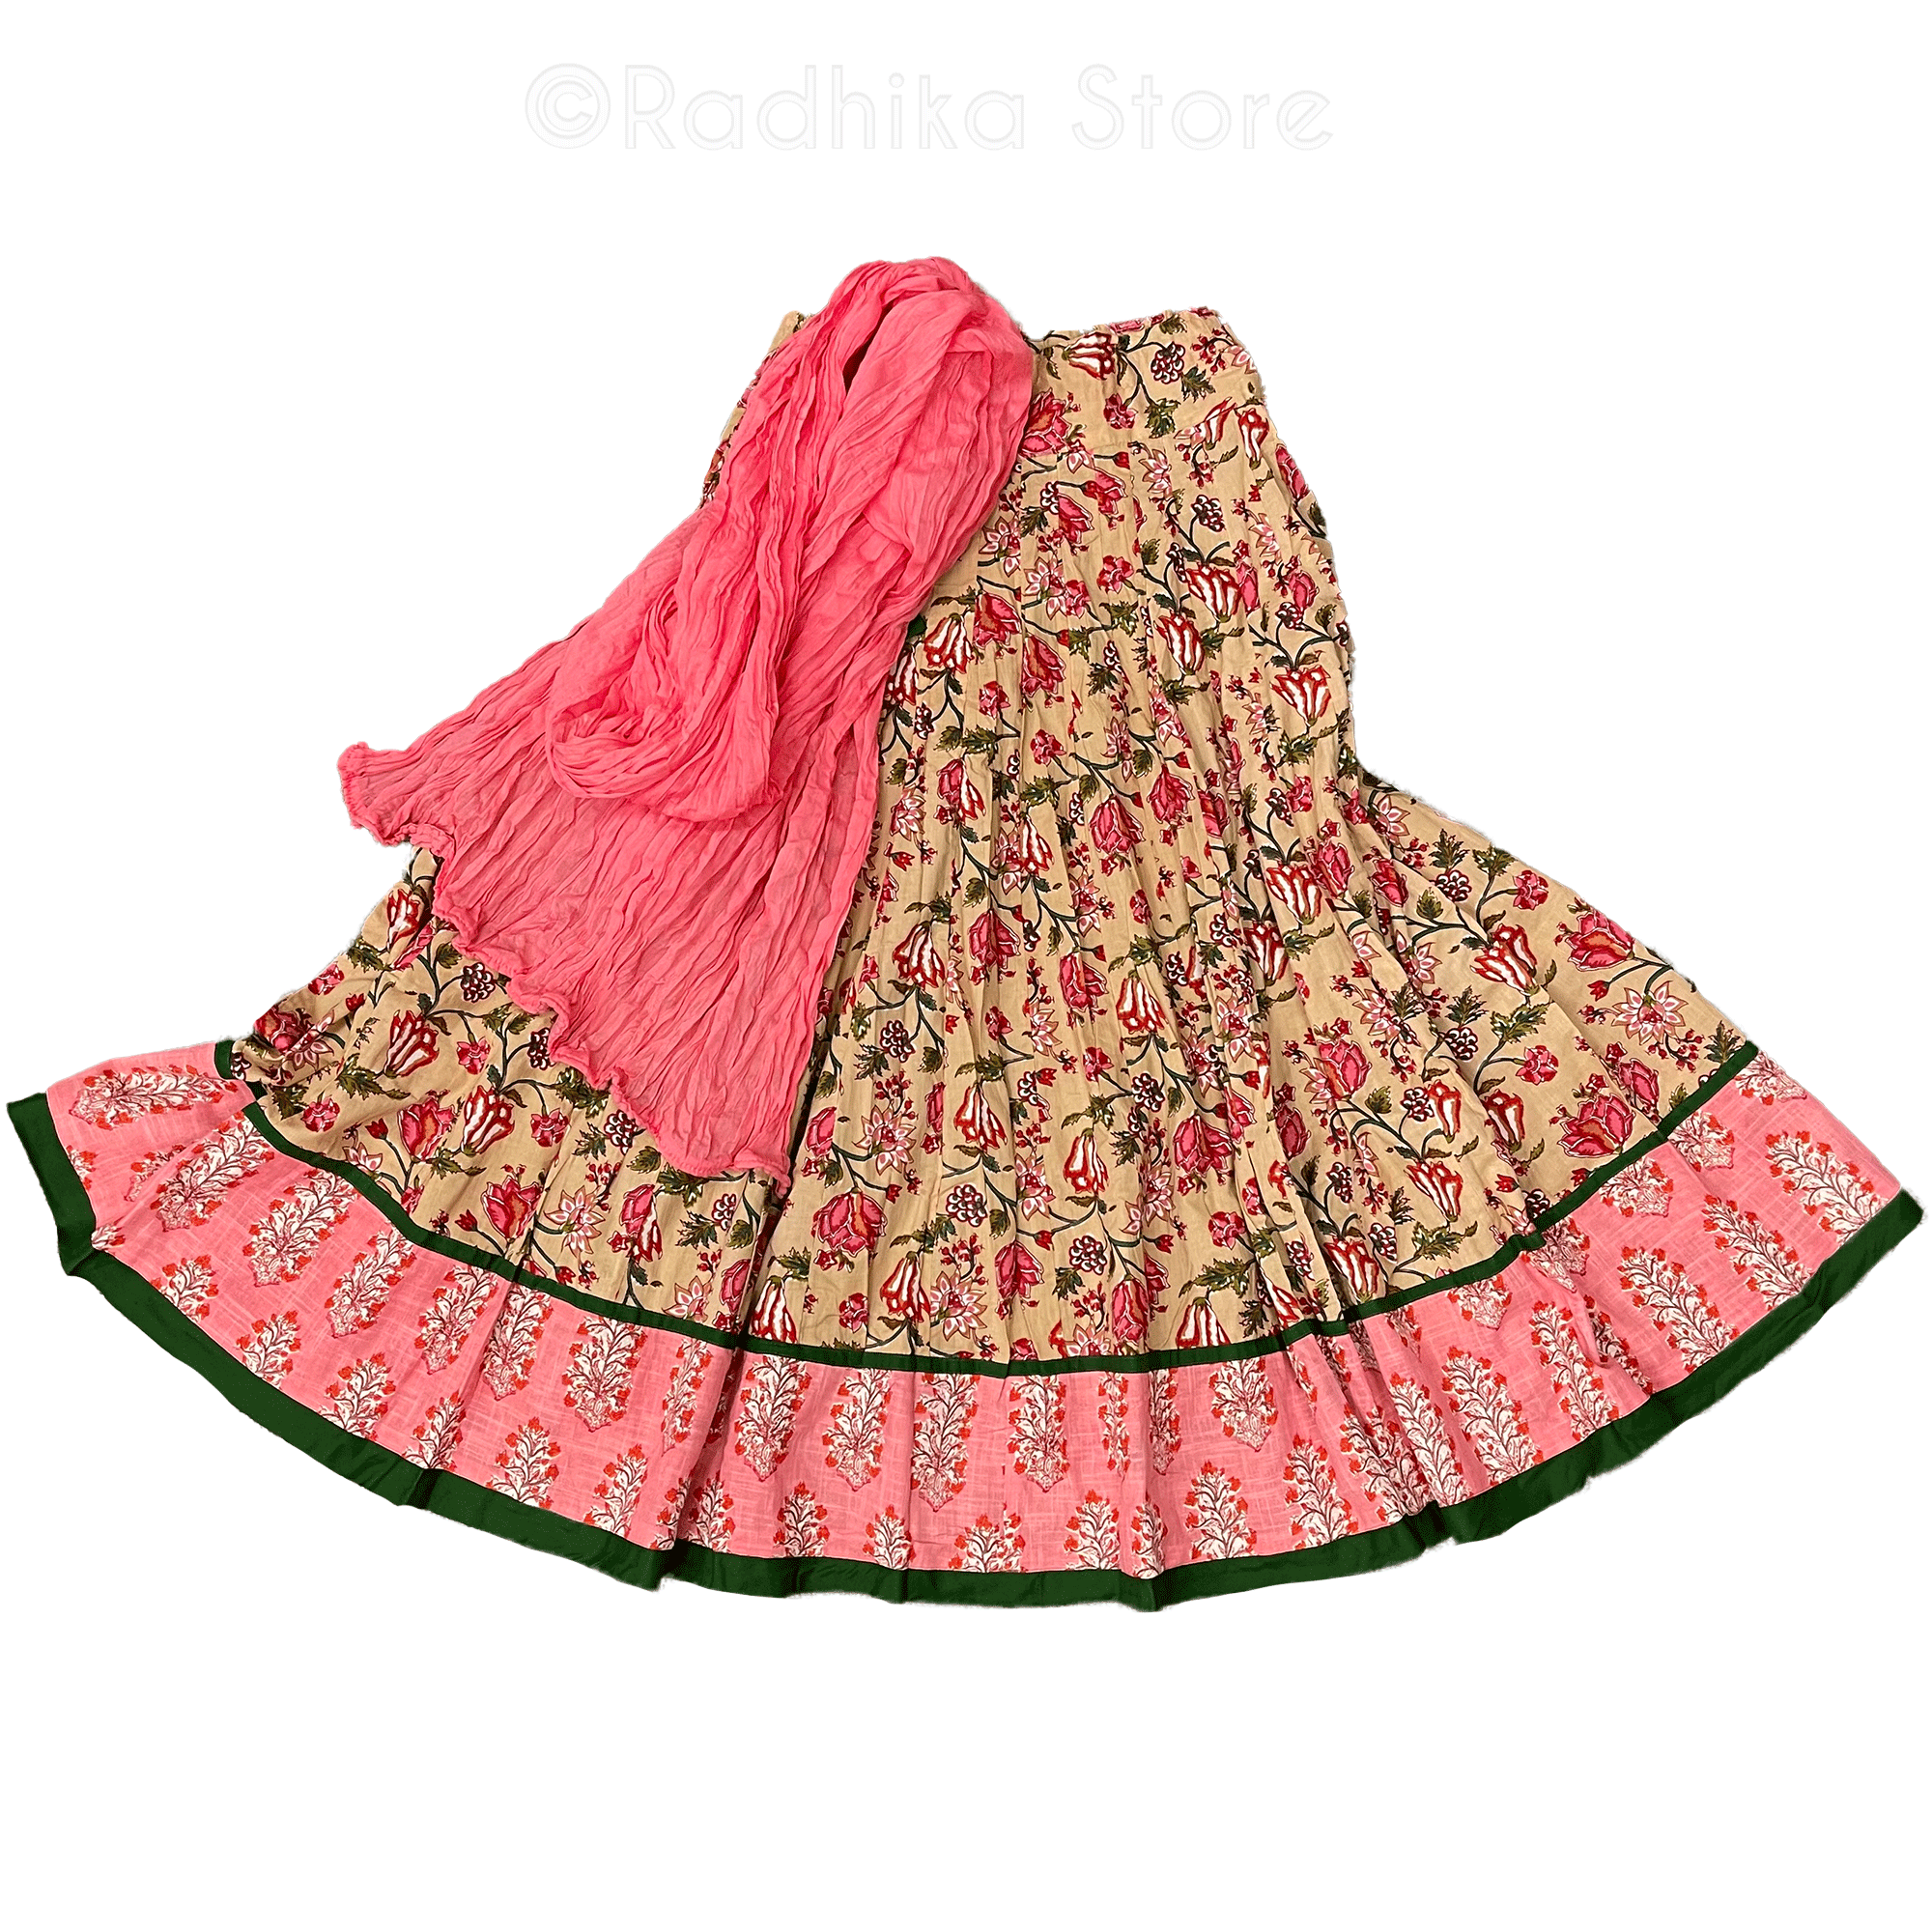 Vrindavan Forest Flowers - Gopi Skirt - Coral, Sand - Cotton Screen Print - With Chadar - S-M-L